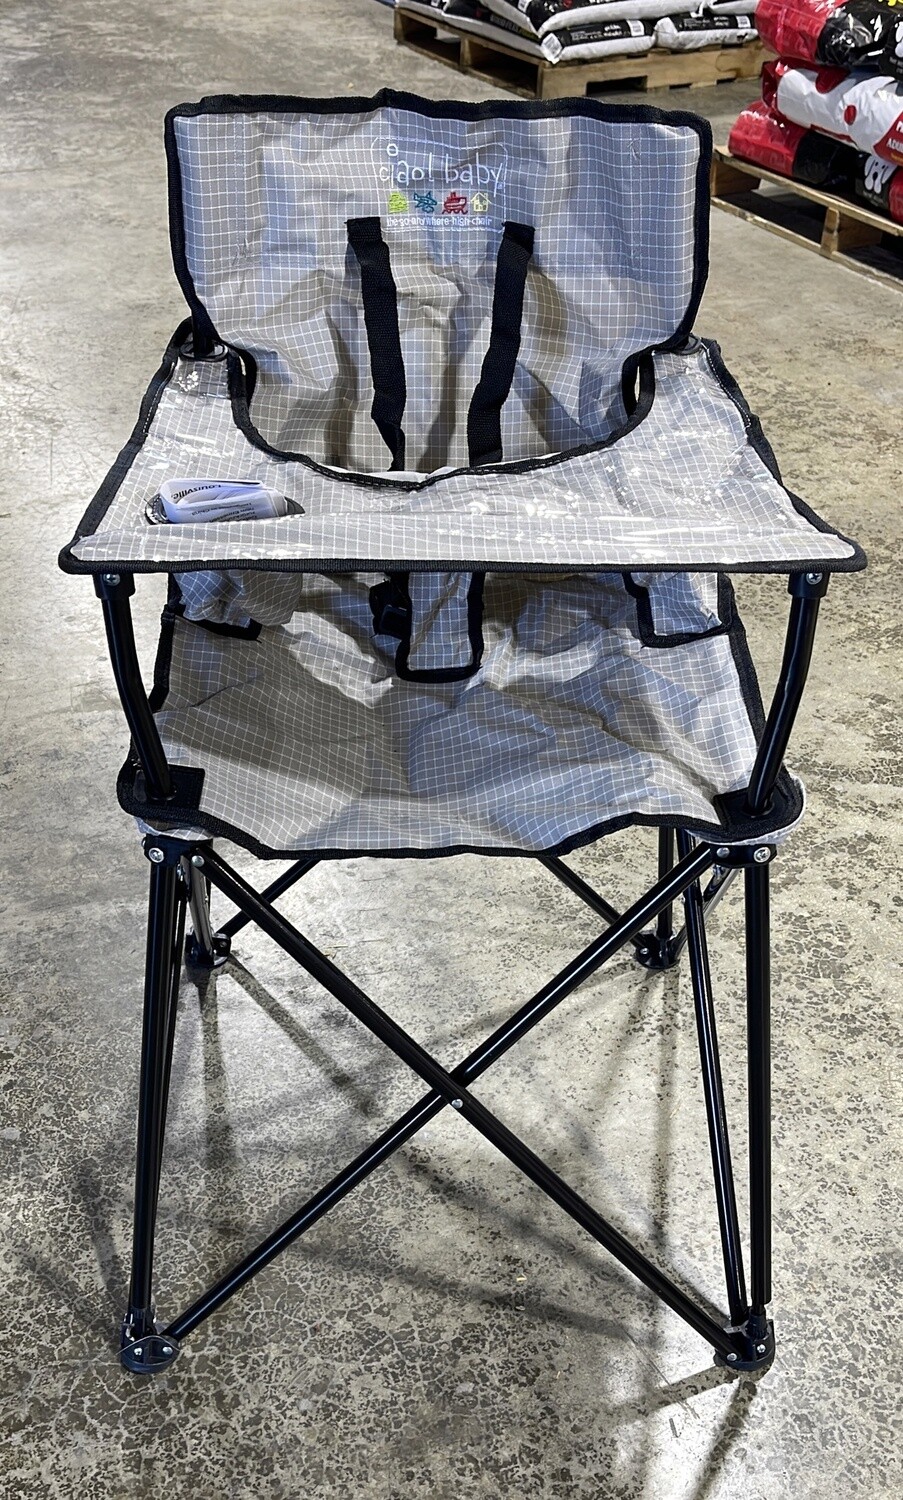 Ciao! Baby! High Chair - Retail $59.99